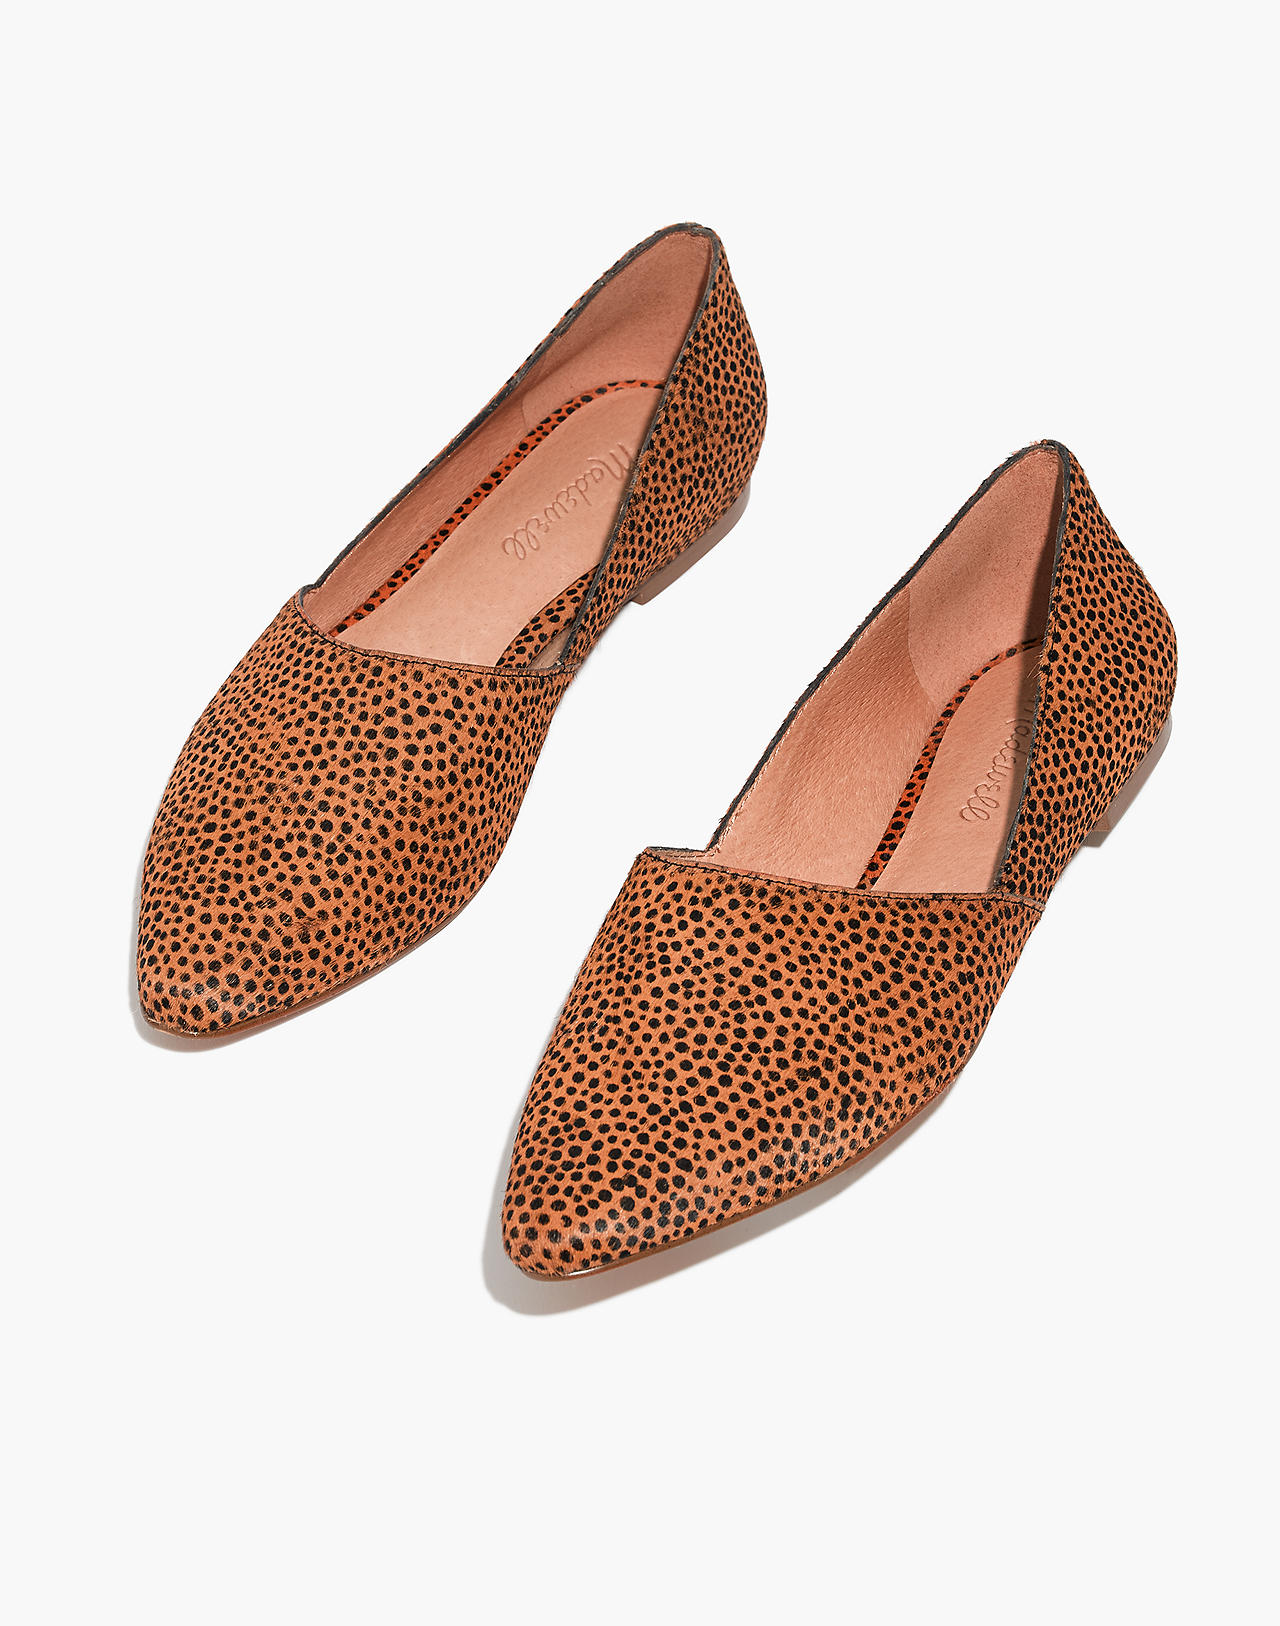 The Lizbeth Flat in Dotted Calf Hair